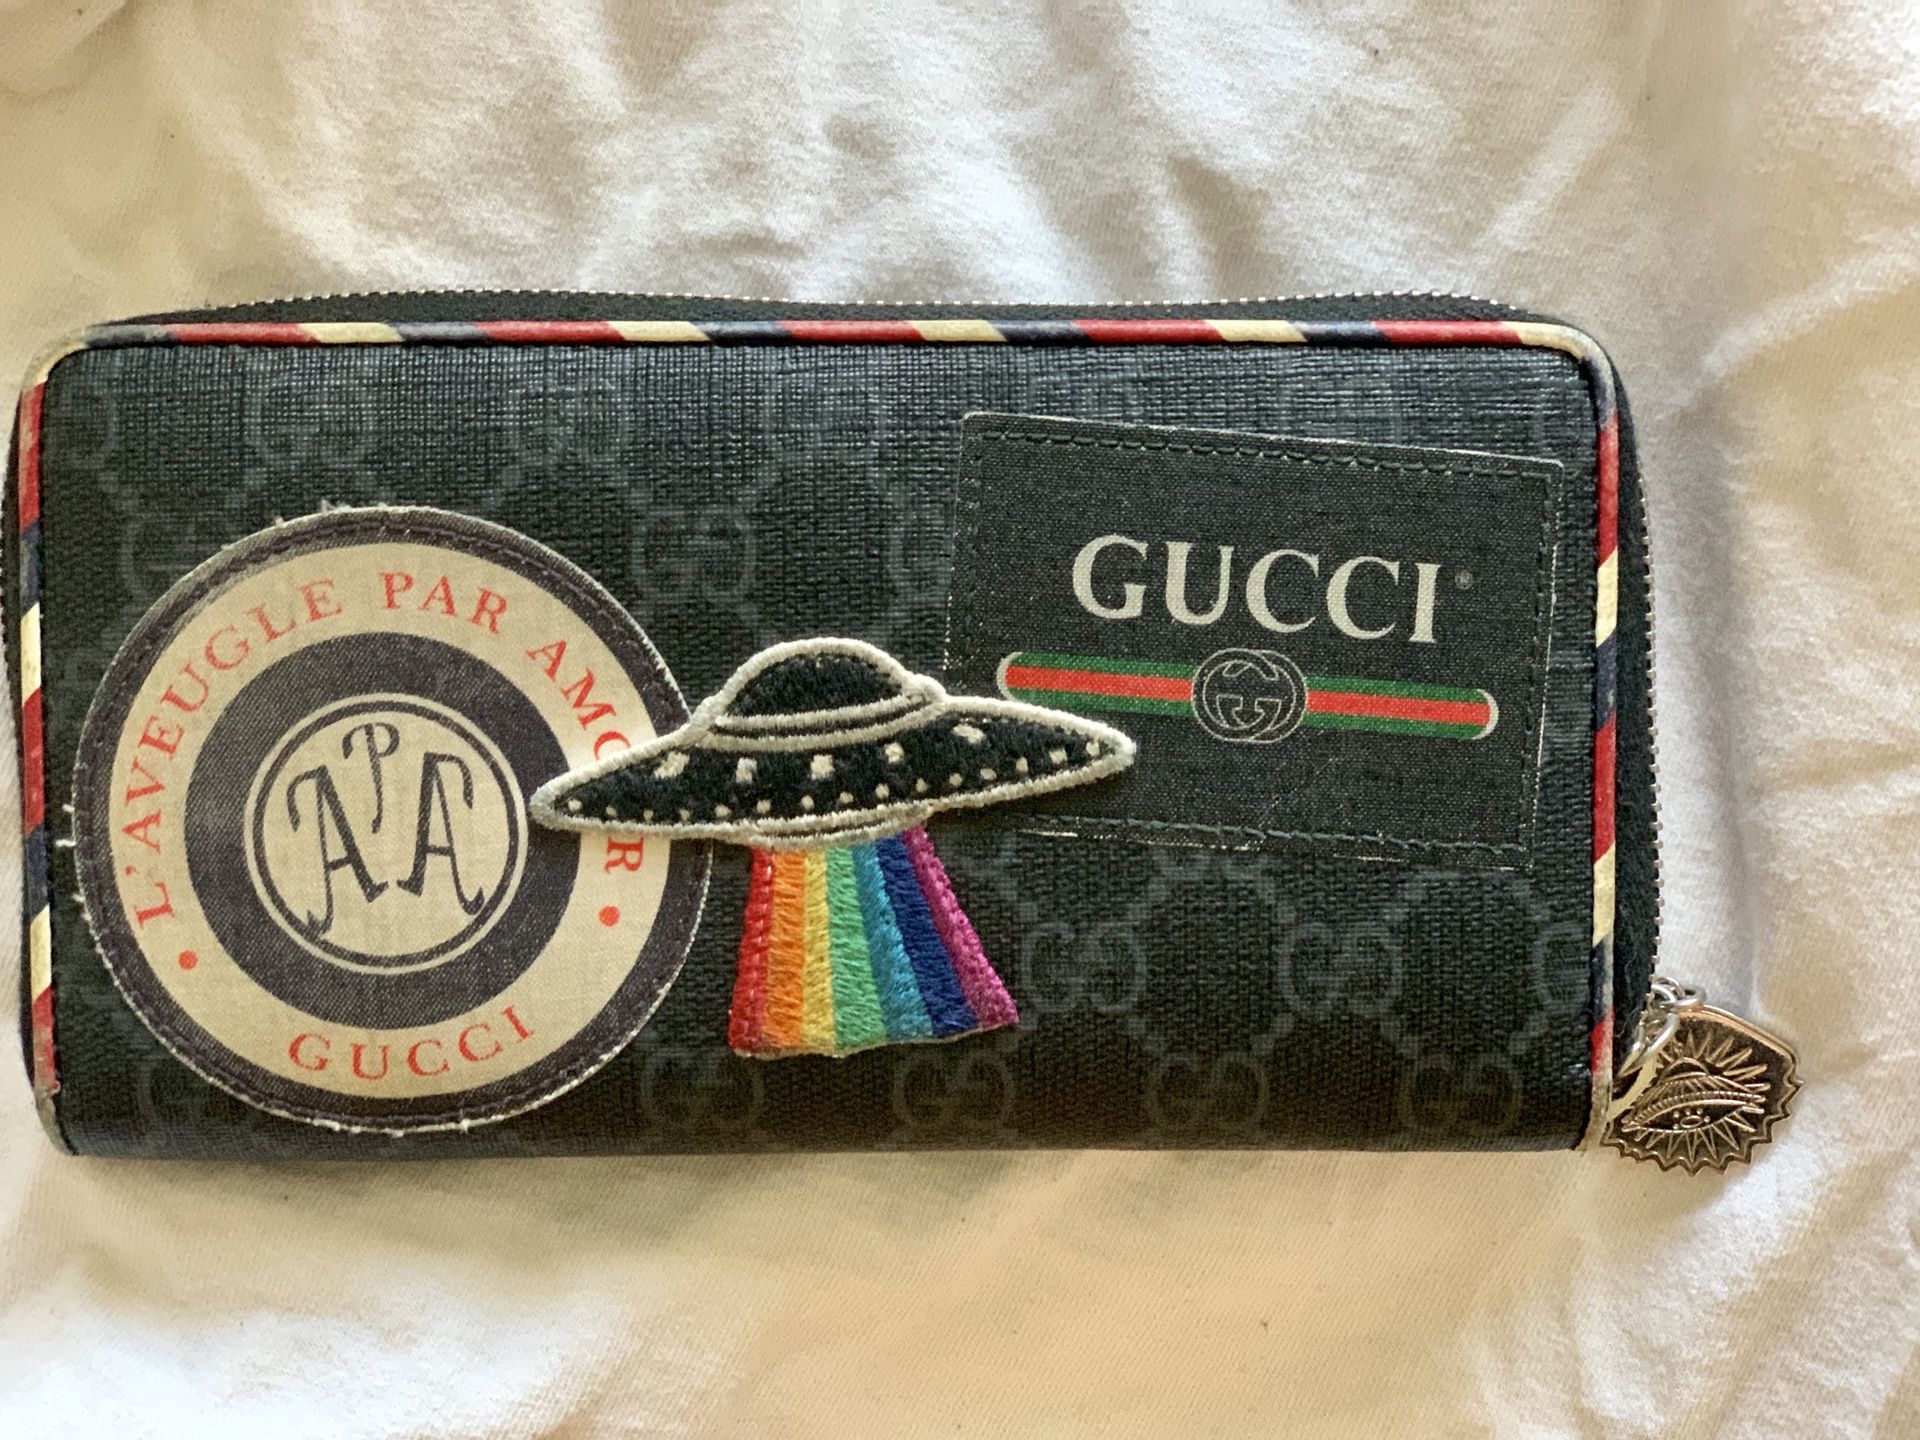 GUCCI WALLET $100 Brand New NEVER USED !!